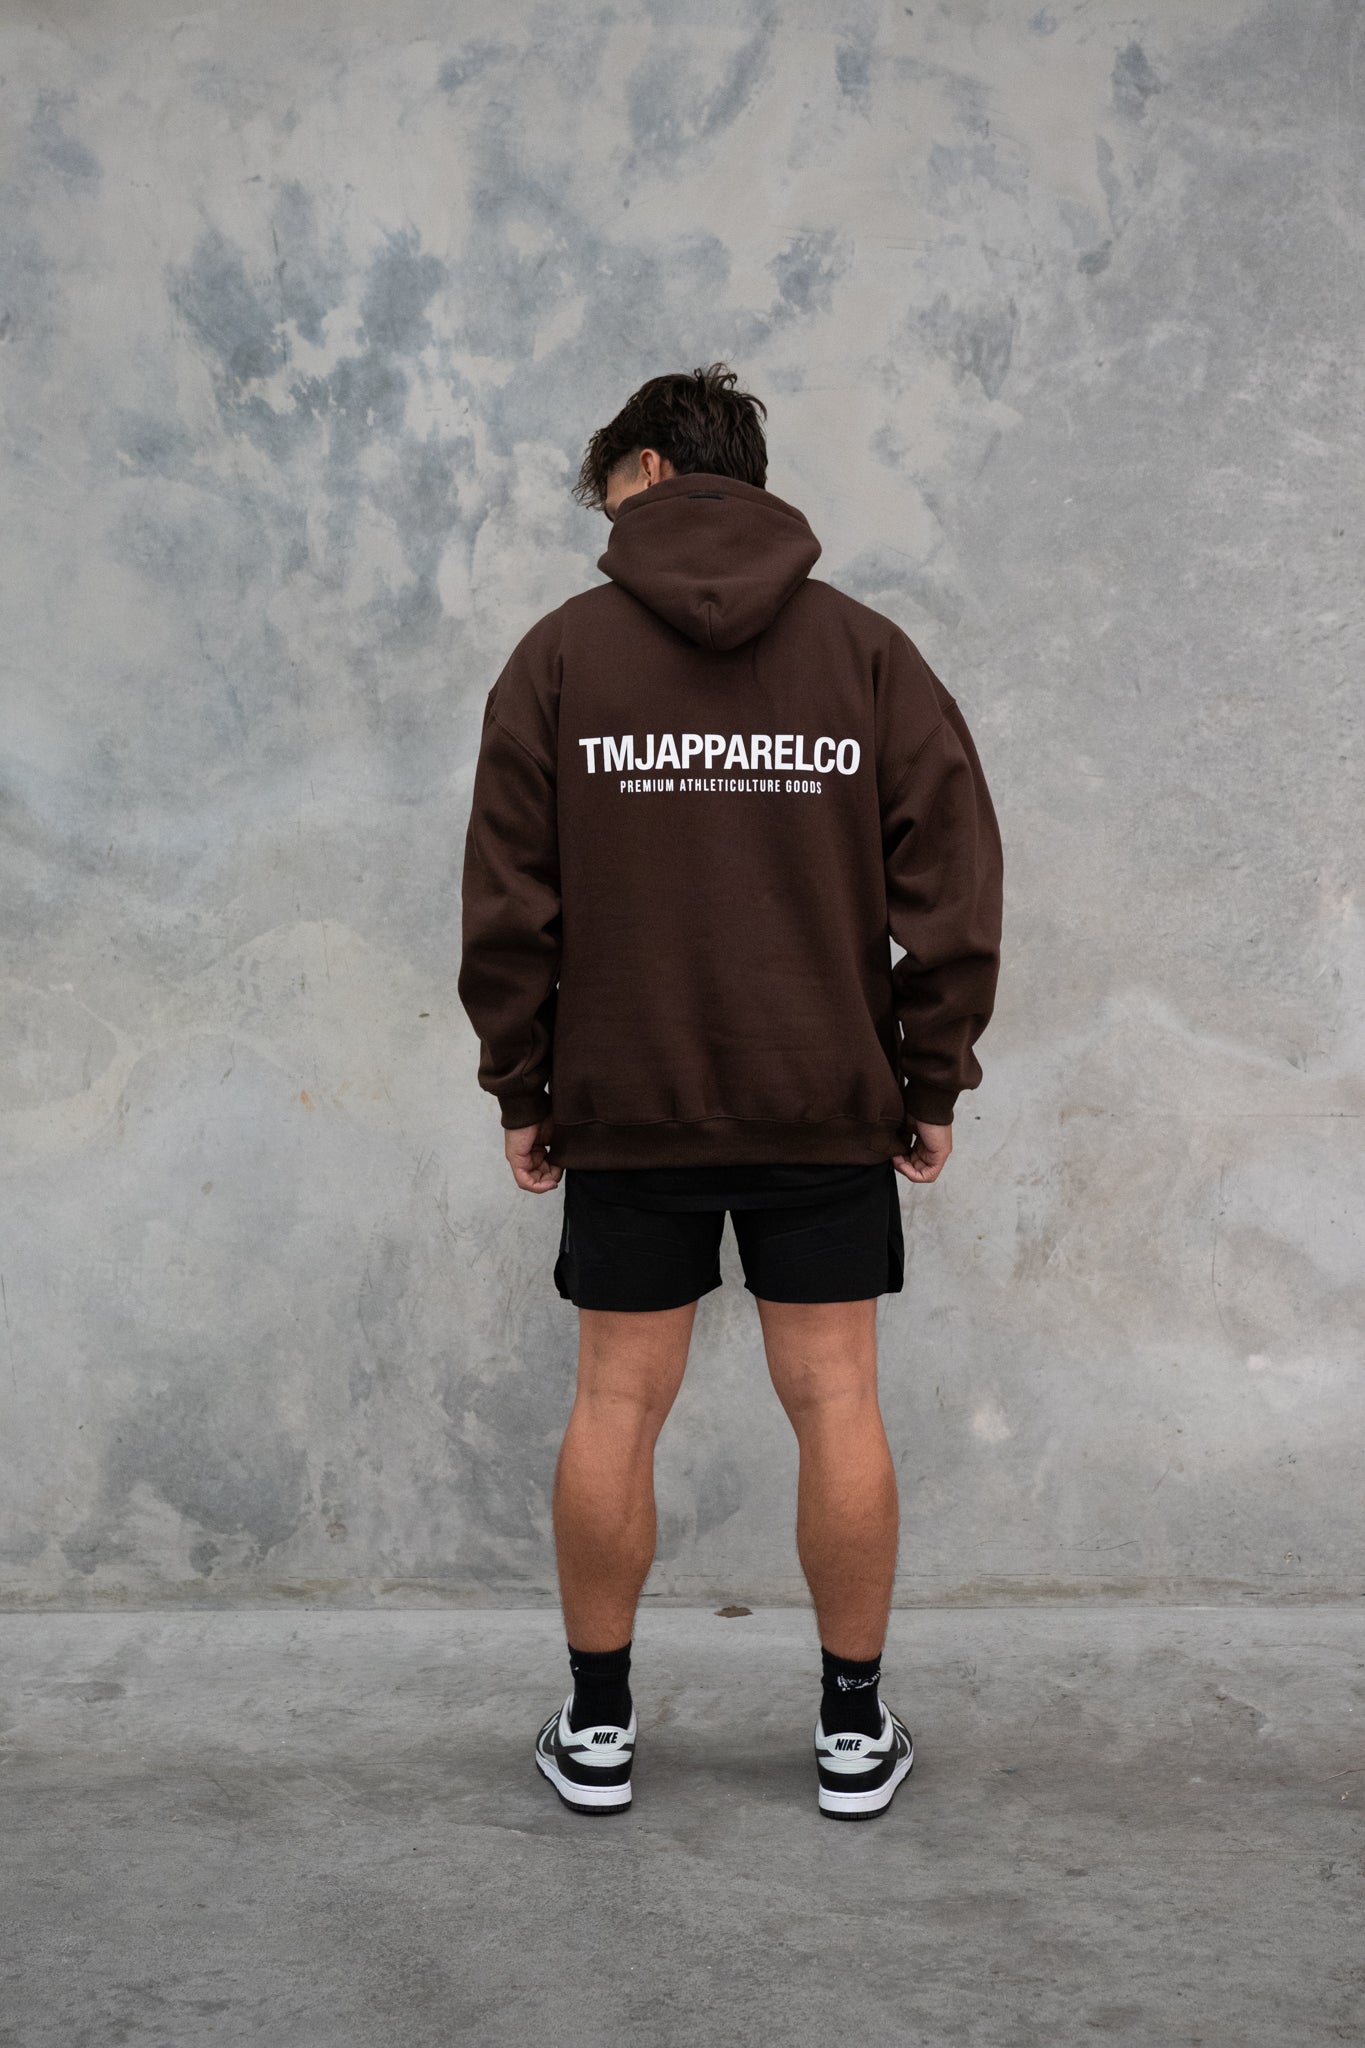  Male wearing TMJ Apparel Athleticulture Hoodie in Brown showing the back of the hoodie with white text saying TMJAPPARELCO Premium Athleticulture Goods in the middle centre of back.